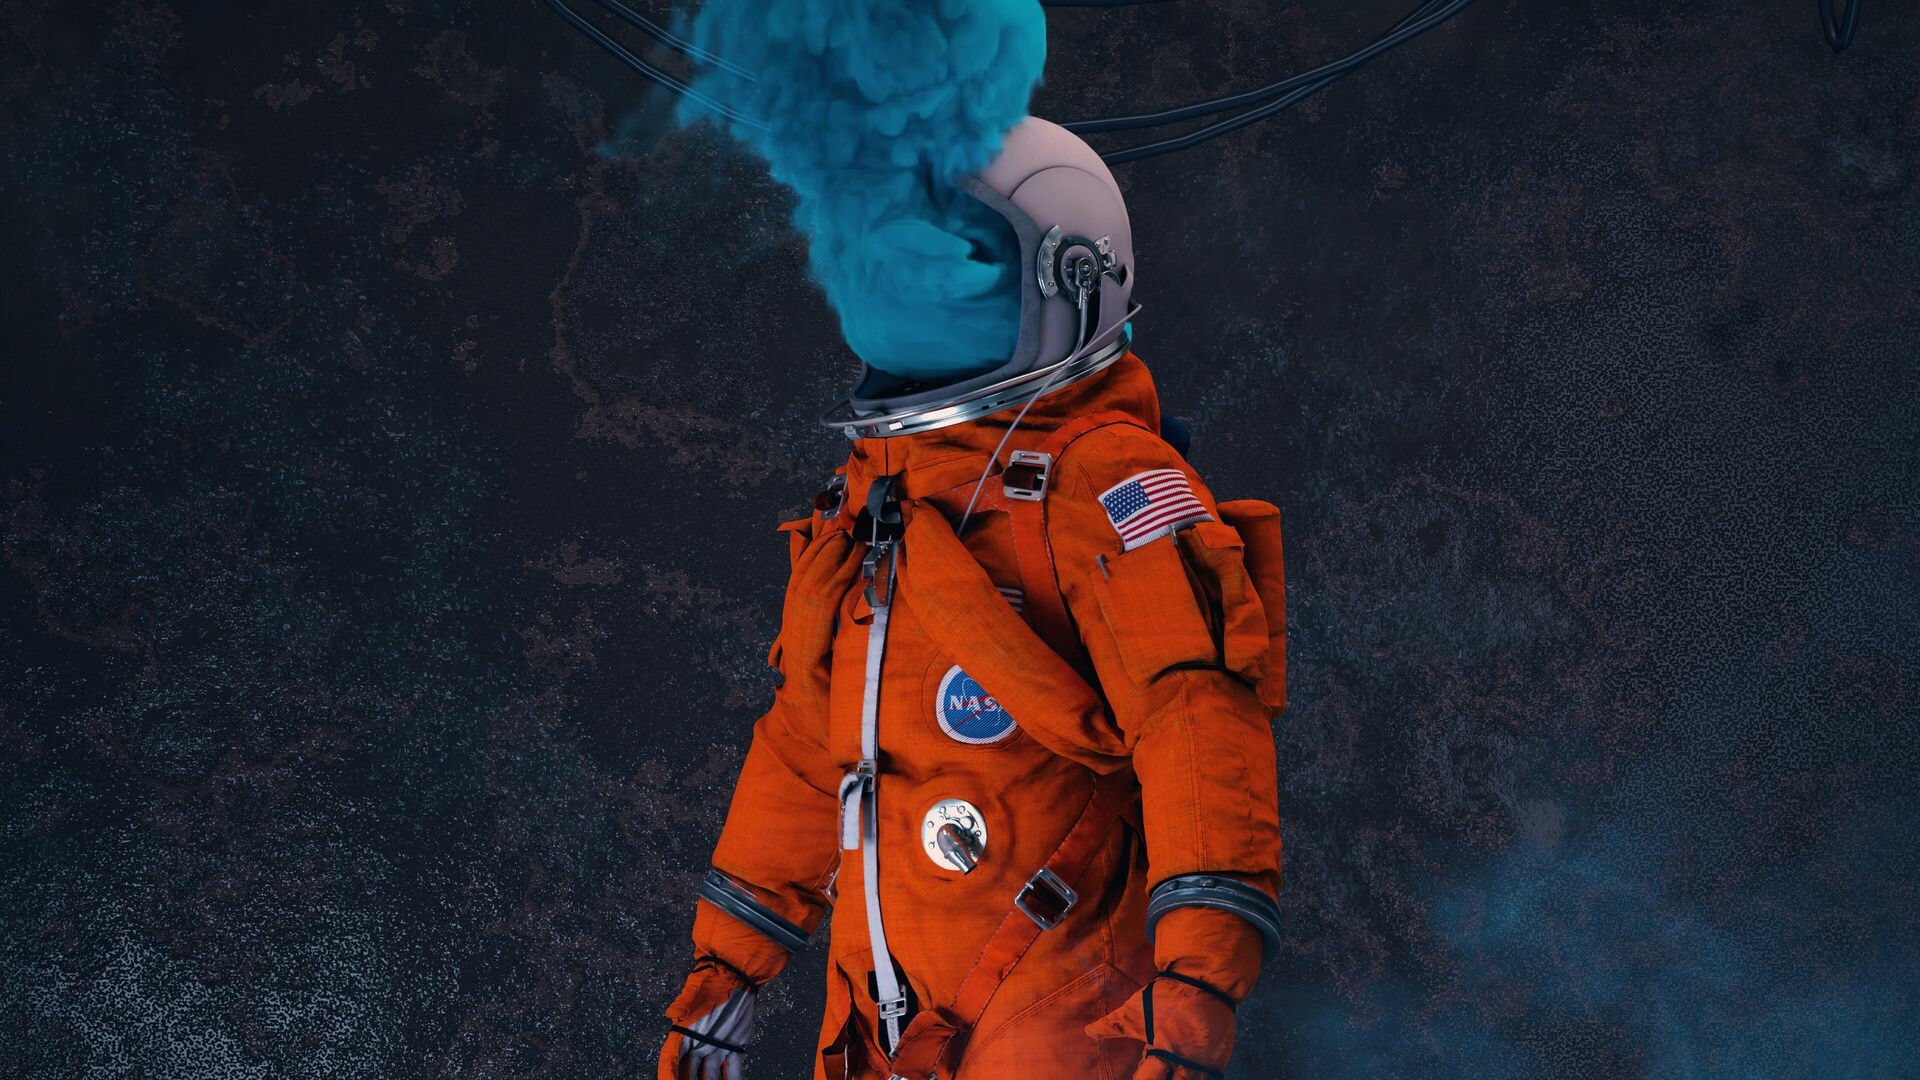 Astronaut: NASA, Abstract, Blue smoke, Spacesuit, Protective equipment. 1920x1080 Full HD Wallpaper.